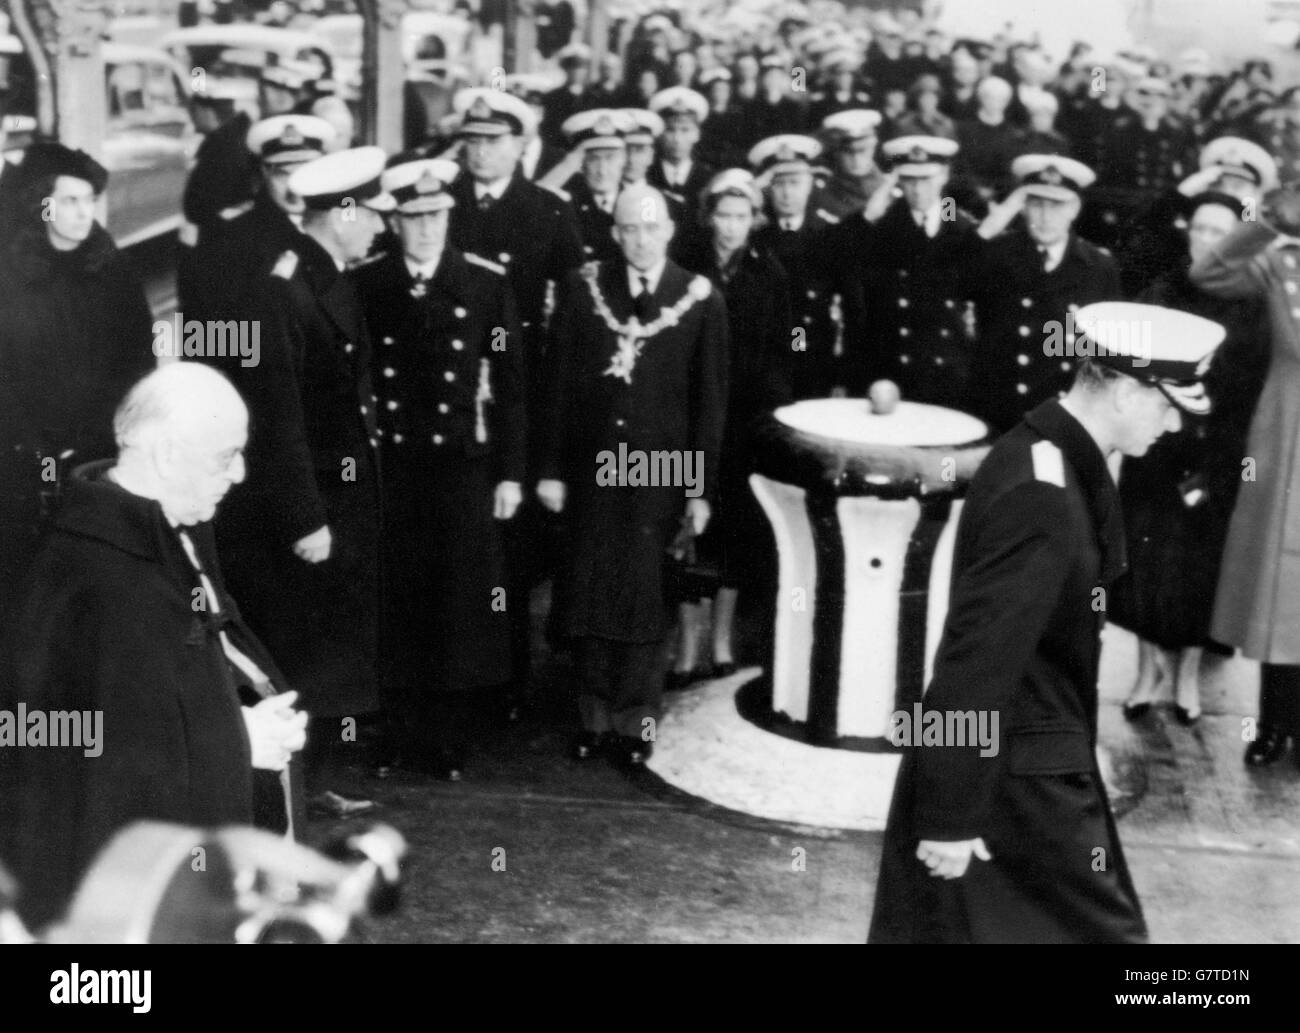 Dressed in the uniform of an Admiral of the Fleet, the Duke of Edinburgh goes on board the Royal Navy vessel, HMS Wakeful, at Portsmouth dockyard, followed by the Archbishop of Canterbury, Dr. Geoffrey Fisher. They were going on board to attend the funeral of Countess Mountbatten which, at her request, was carried out at sea off Portsmouth. Stock Photo